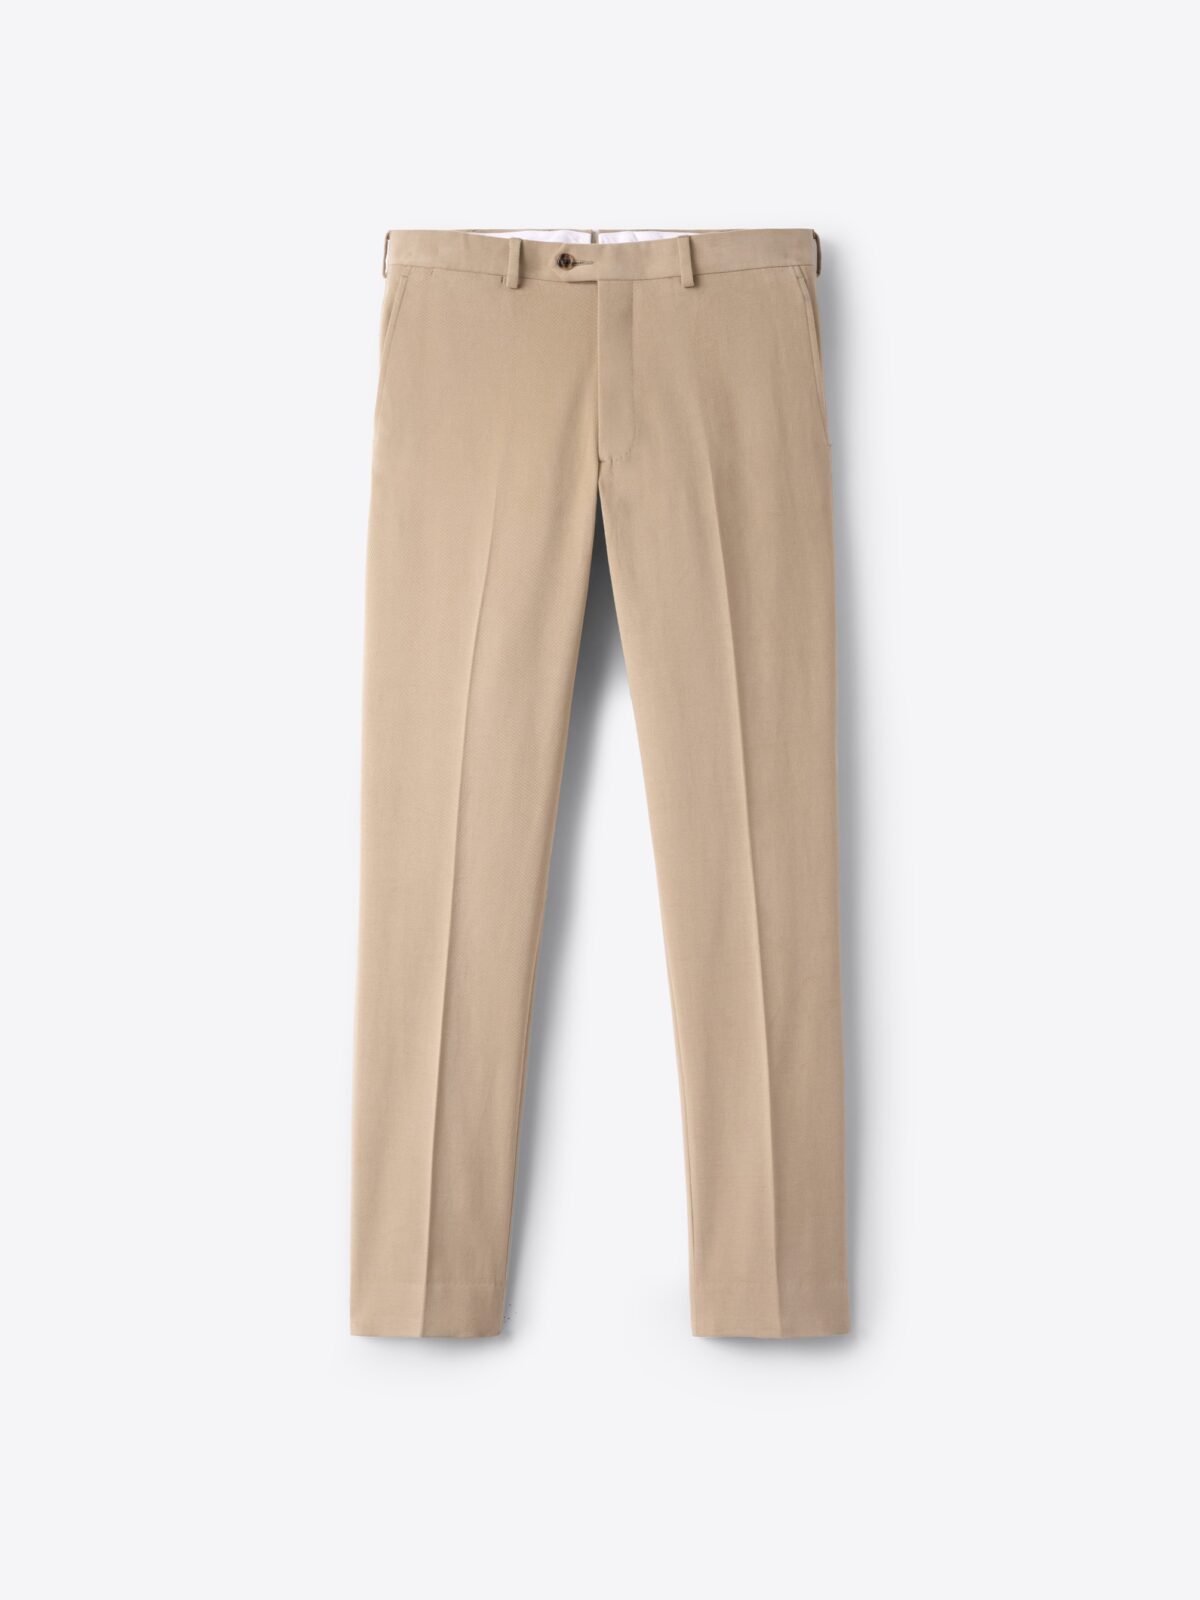 Beige Brushed Heavy Stretch Cotton Dress Pant - Custom Fit Tailored Clothing